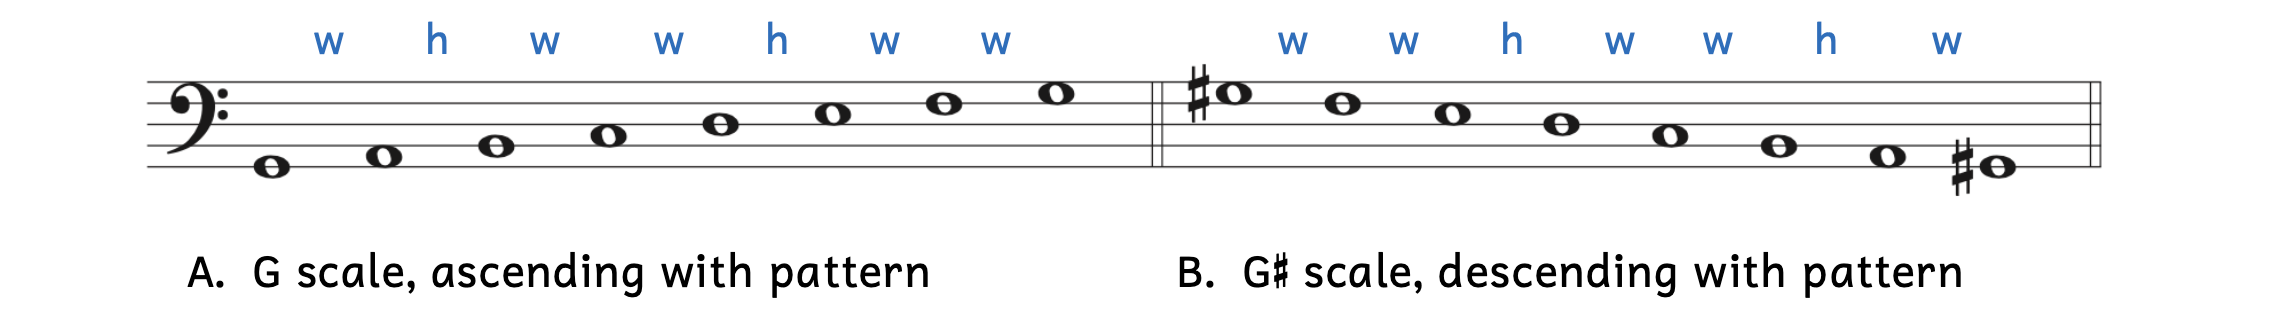 Step two: add the sequence of steps. In Example A, the pattern is whole-half-whole-whole-half-whole-whole. Since Example B is descending, the pattern is in reverse order: whole-whole-half-whole-whole-half-whole.